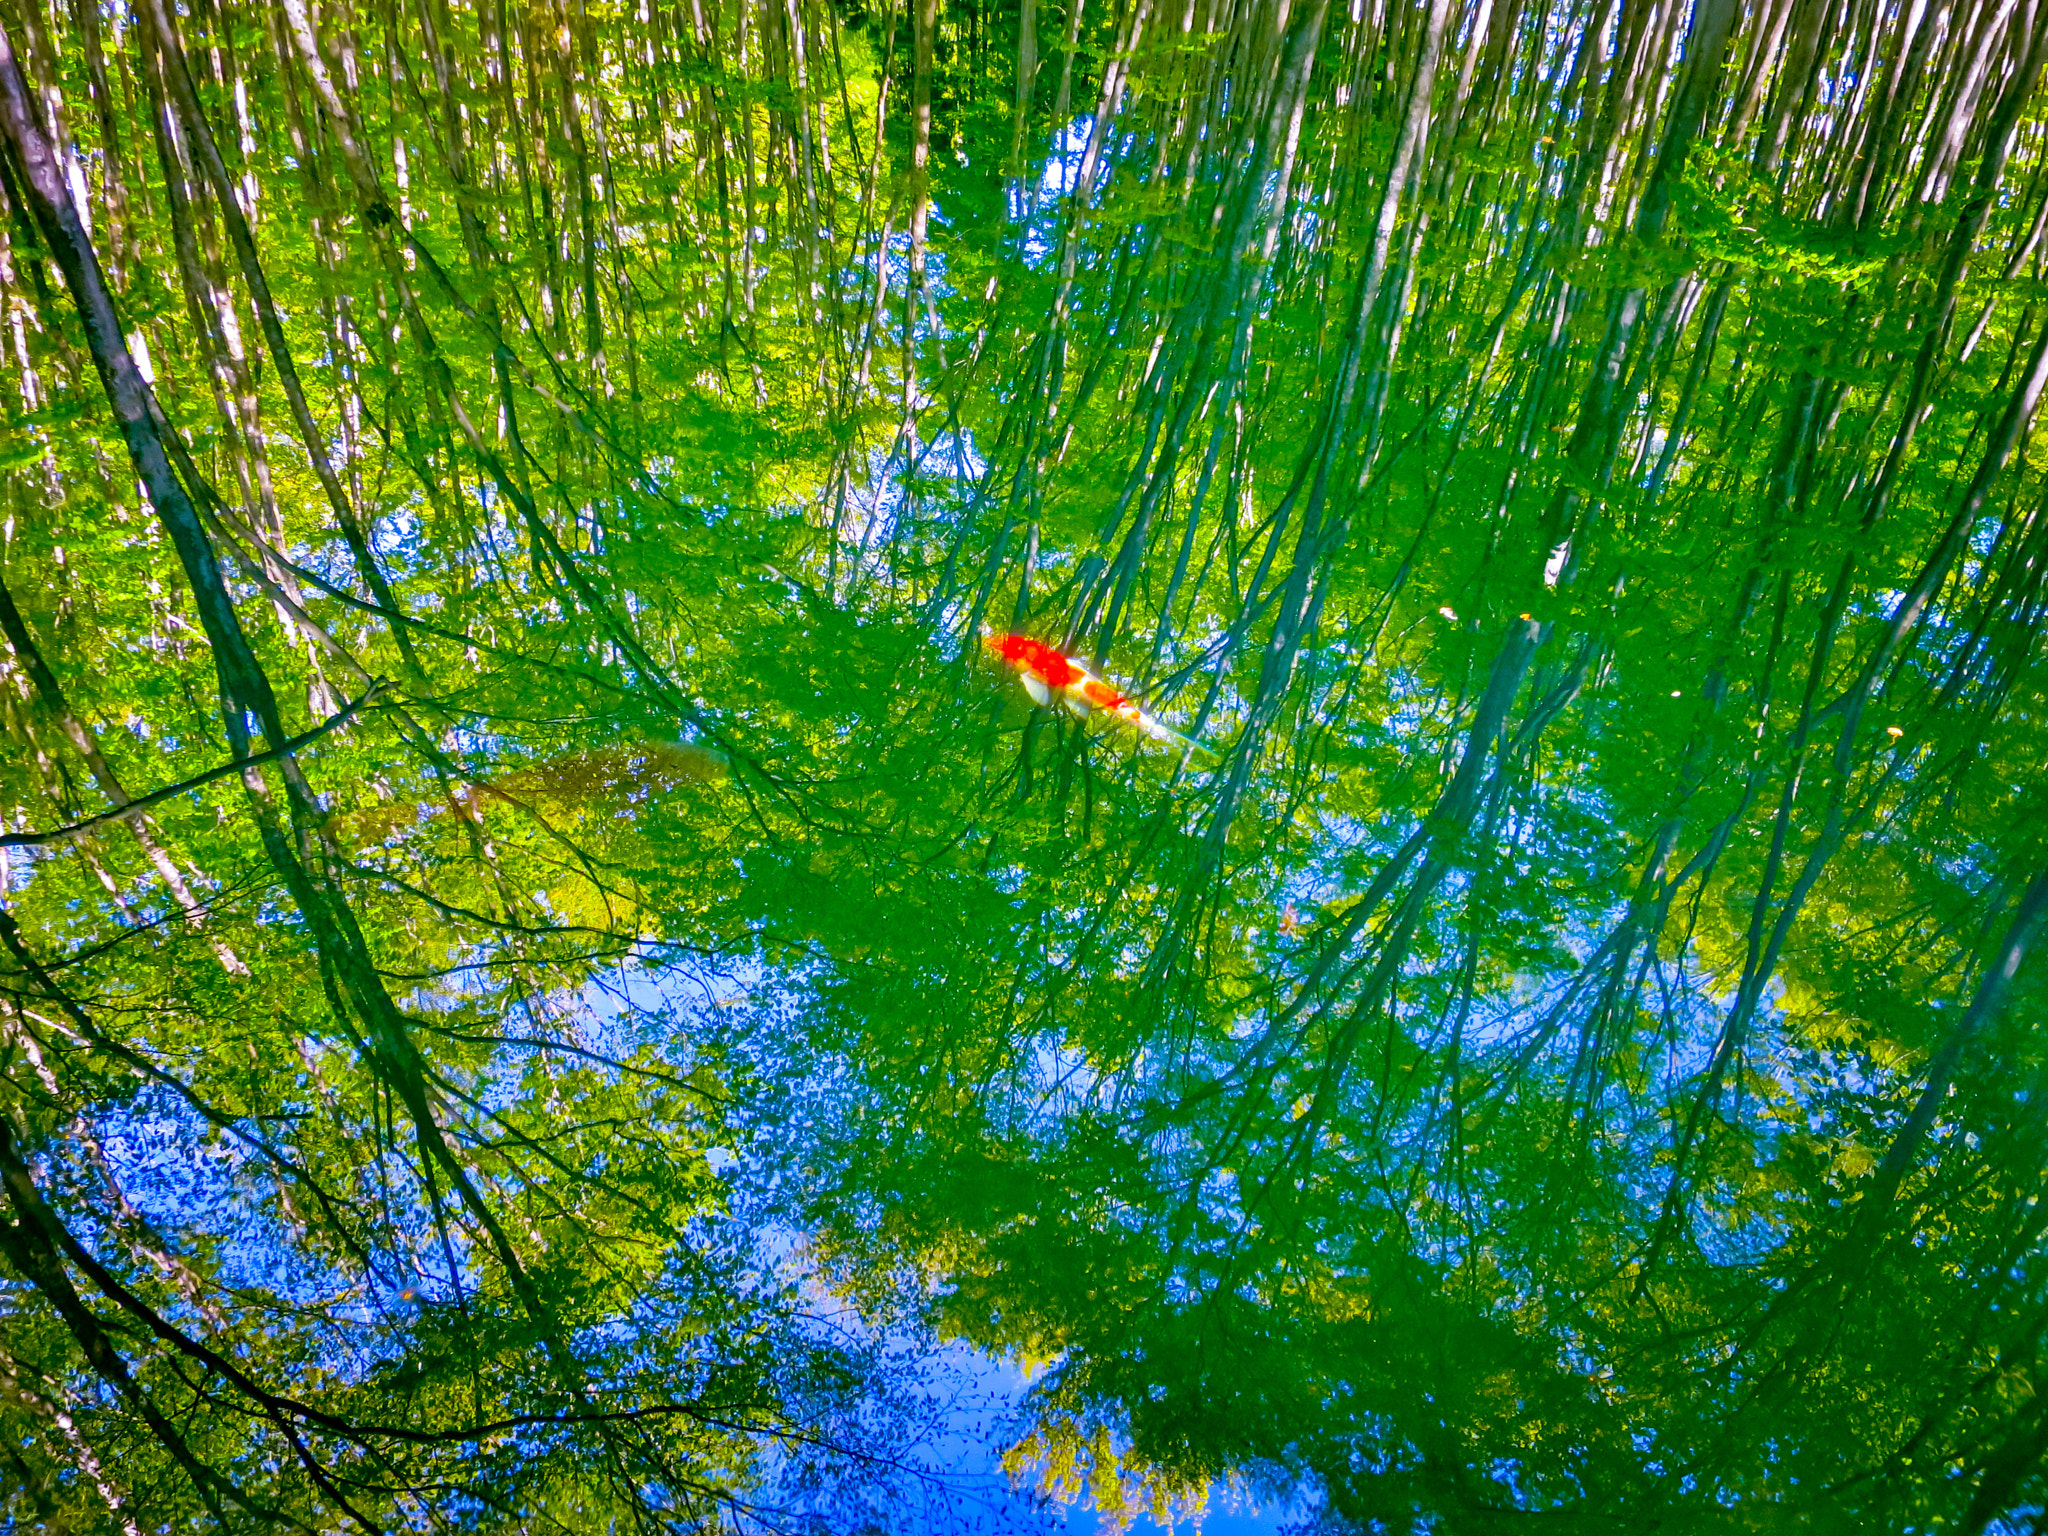 Canon PowerShot S120 sample photo. Reflections of fresh green leaves and a red carp photography